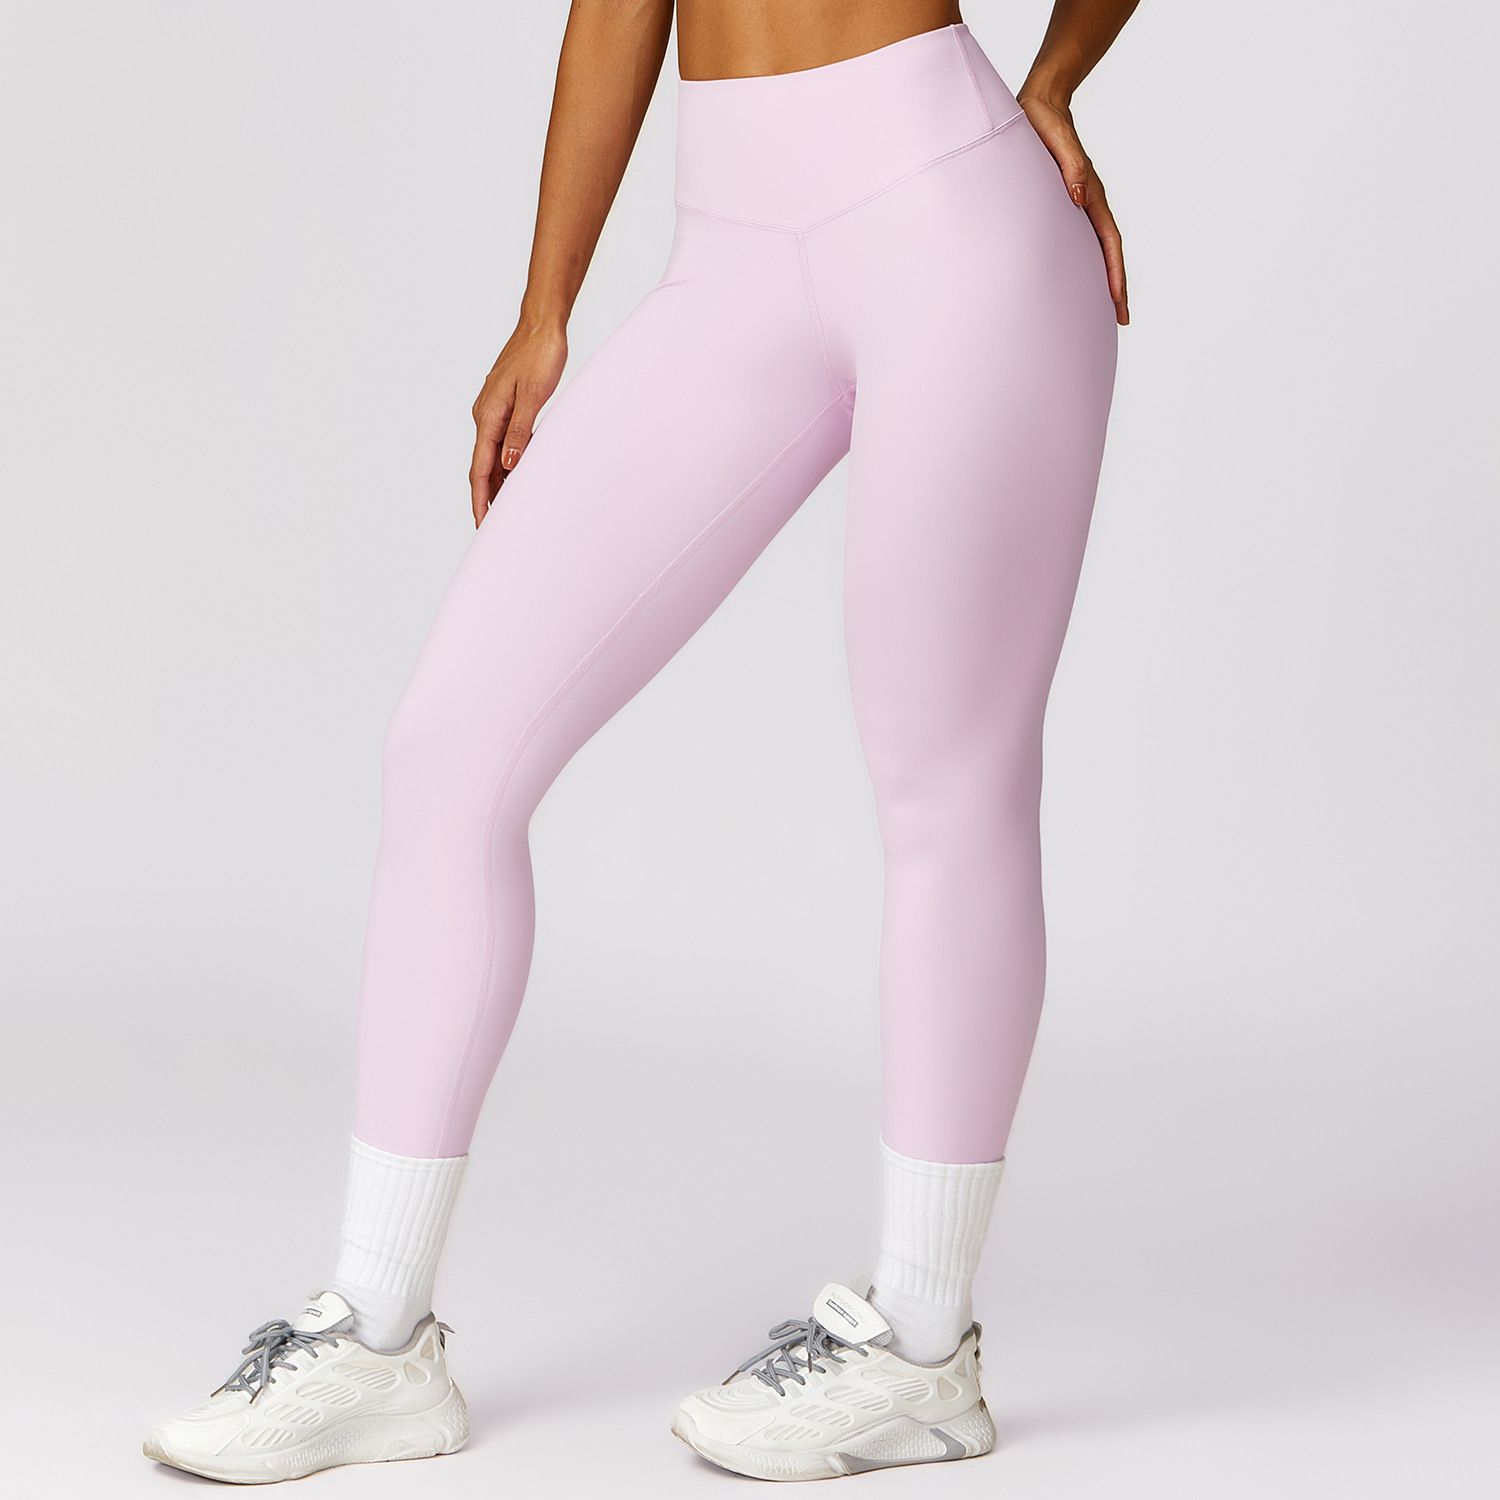 High-Waisted Lifting and Quick-Drying Yoga Pants for Women Slim Fit Fitness Leggings Ideal for Running and Sporty Layering